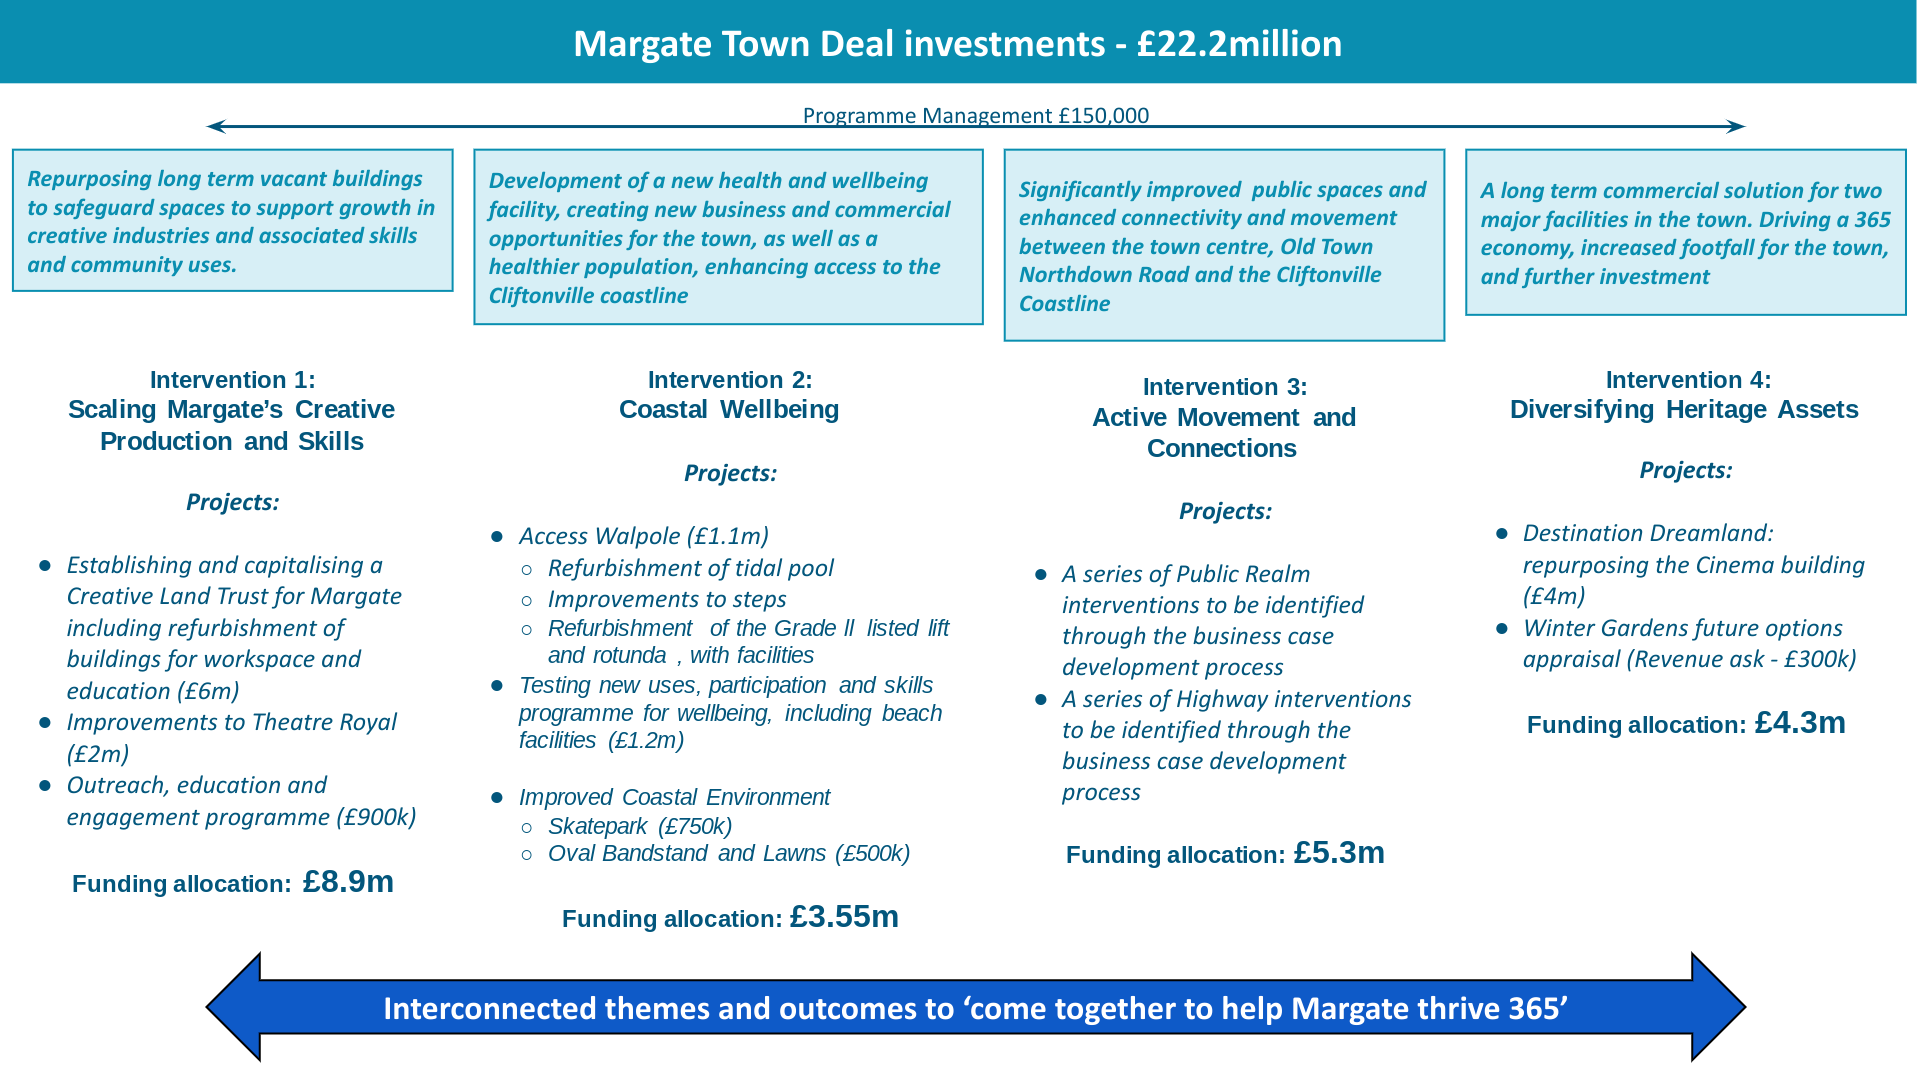 Intervention 1: Scaling Margate's Creative Production and Skills £8.9m - Intervention 2: Coastal Wellbeing £3.55m - Intervention 3: Active Movement and Connections £5.3m - Intervention 4: Diversifying Heritage Assets £4.3m